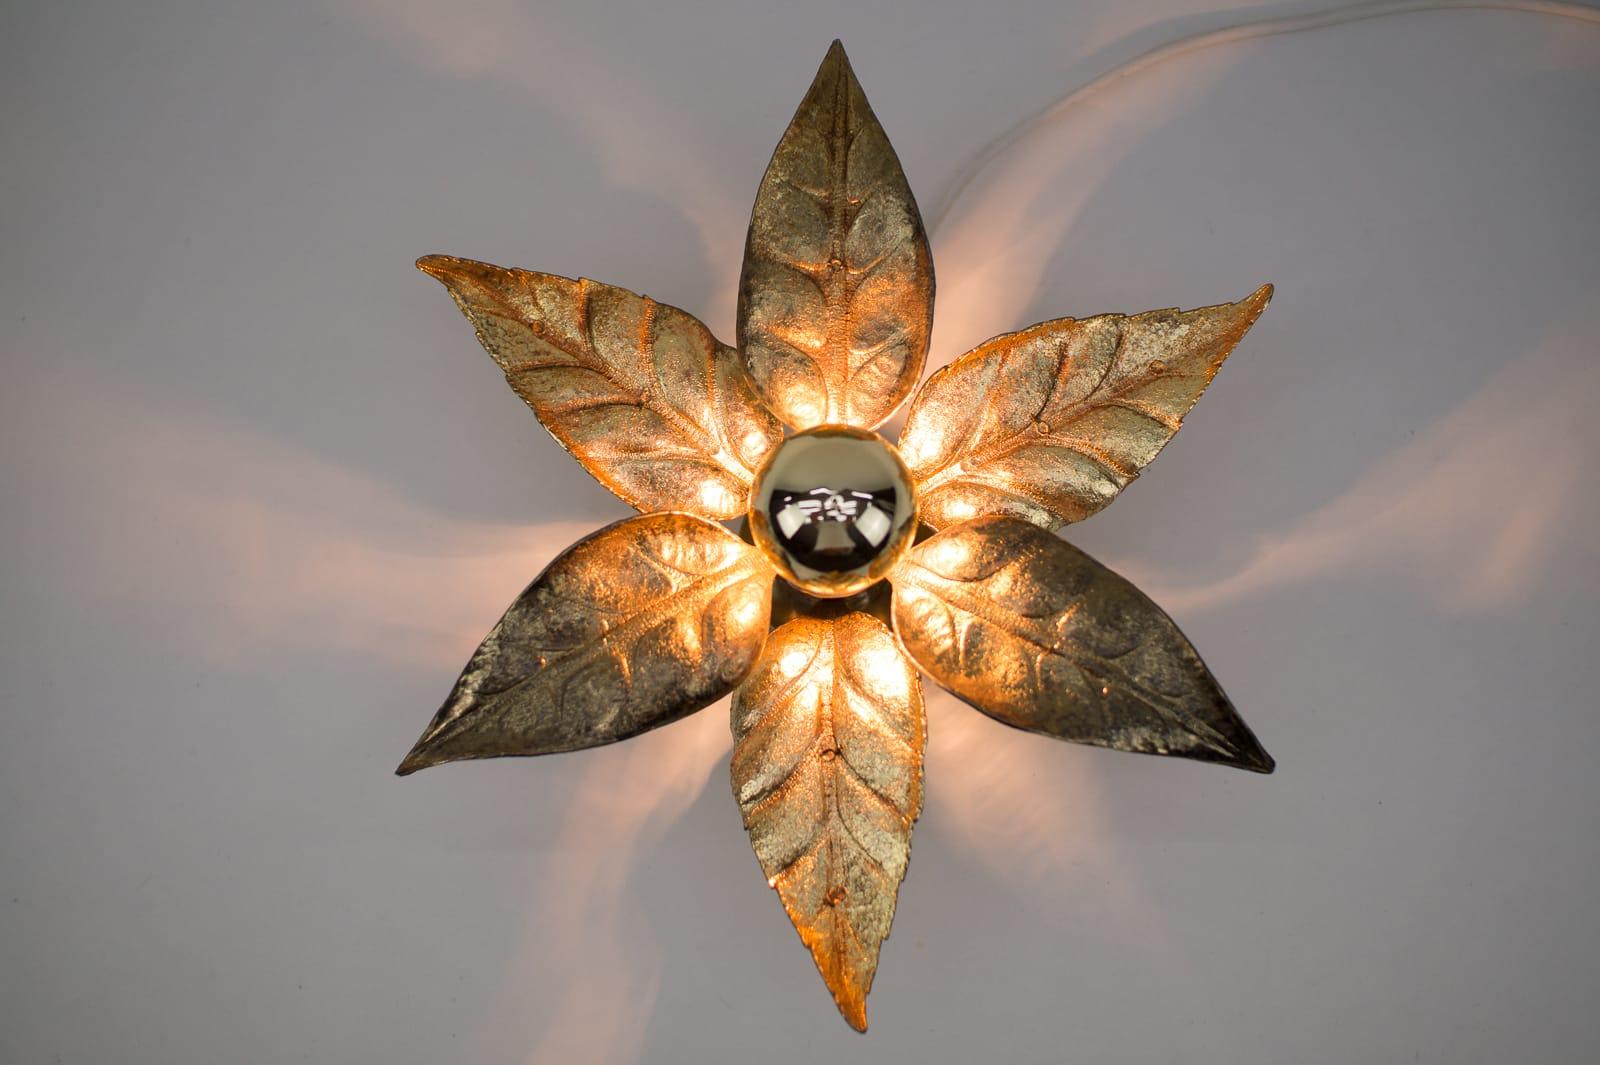 A gold wall sconce or wall light by Belgian designer Willy Daro for lighting manufacturer Massive. It has a wonderful naturalistic shape and is very decorative of the 1970s era.

Measures: The double lamp is 75cm long and 18cm depth, with bulb